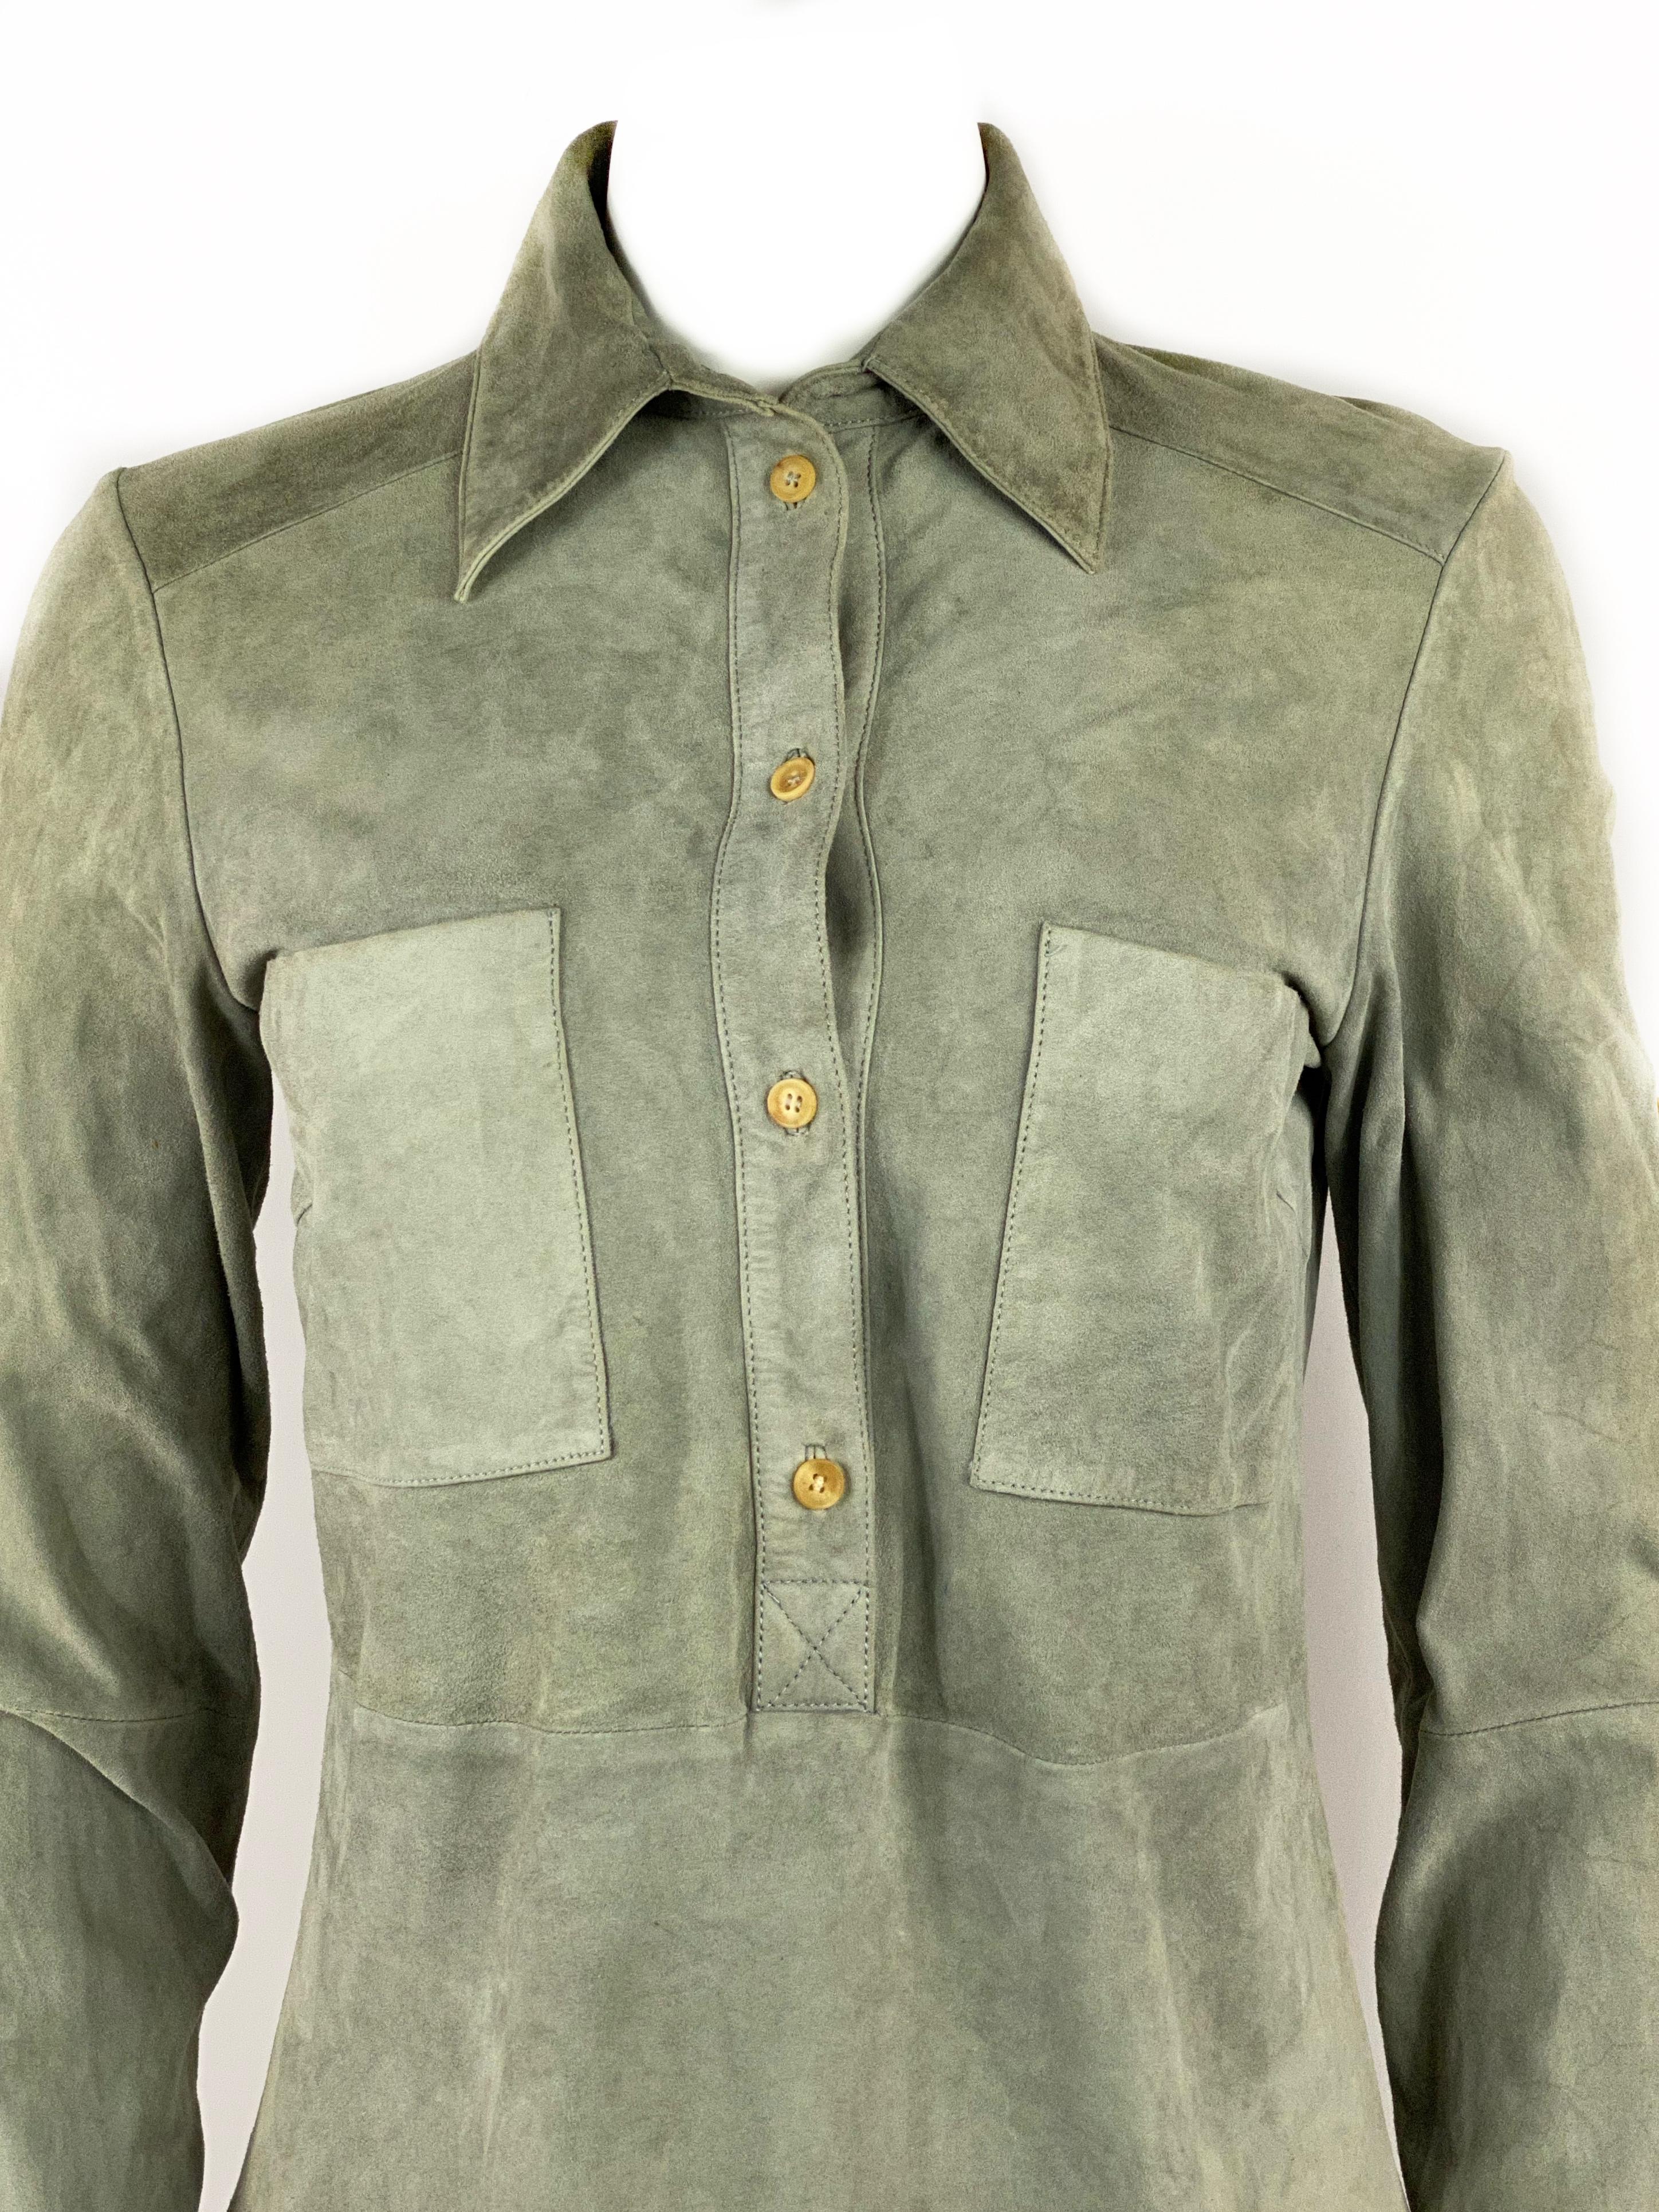 Celine Grey Green Olive Suede Button-Down Shirt Top Size 38

Product details:
Size FR 38
100% goat leather
Half front button closure
Collar detail
Featuring one pocket on each side 
Adjustable sleeves, long or half sleeve
Made in France

